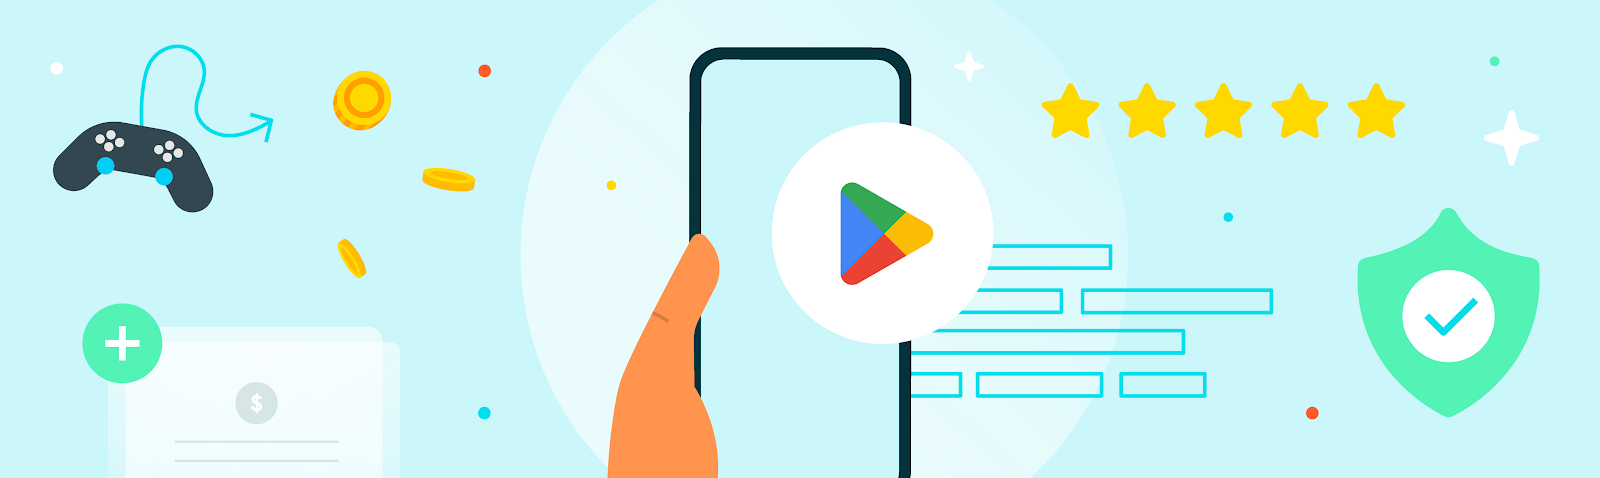 Google Play Store Embraces NFT Games: A New Dawn for Blockchain Gaming